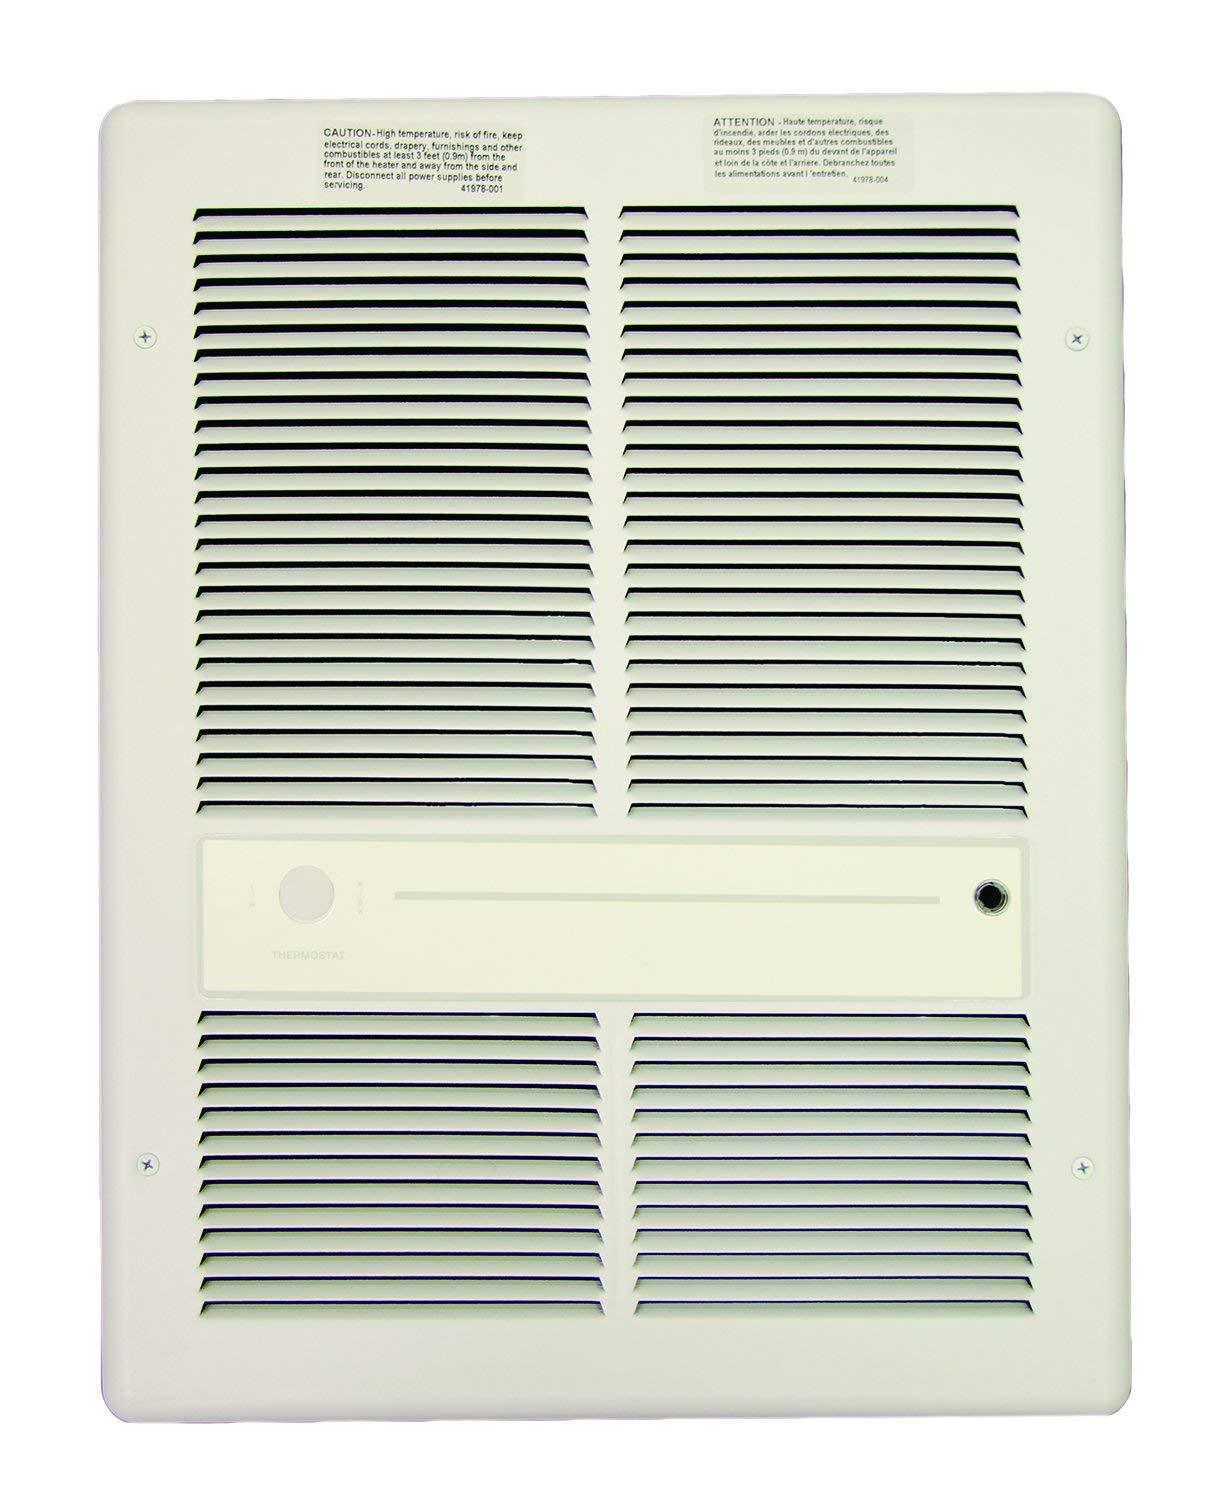 TPI 4000W 277V 3310 Series Fan Forced Wall Heater (White) - Without Summer Fan Switch - No Thermostat - G3316RPW